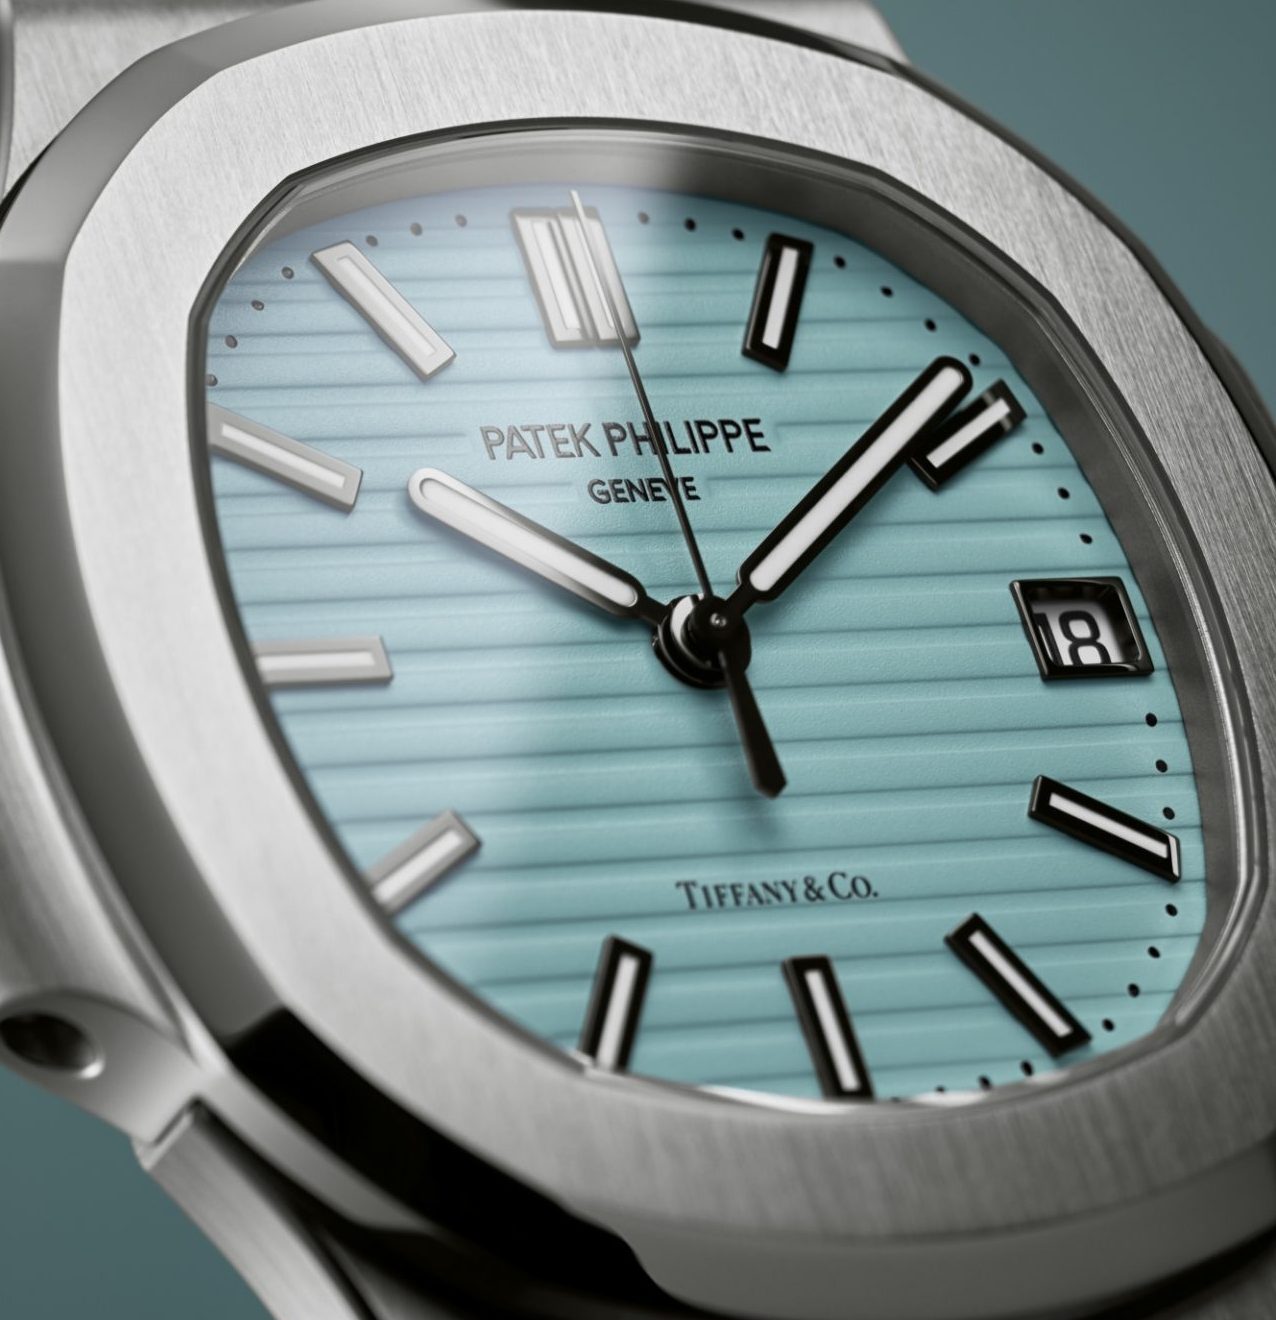 Patek Philippe 5711 Tiffany Ref. 5711/1A-018 – The Second Hand Club